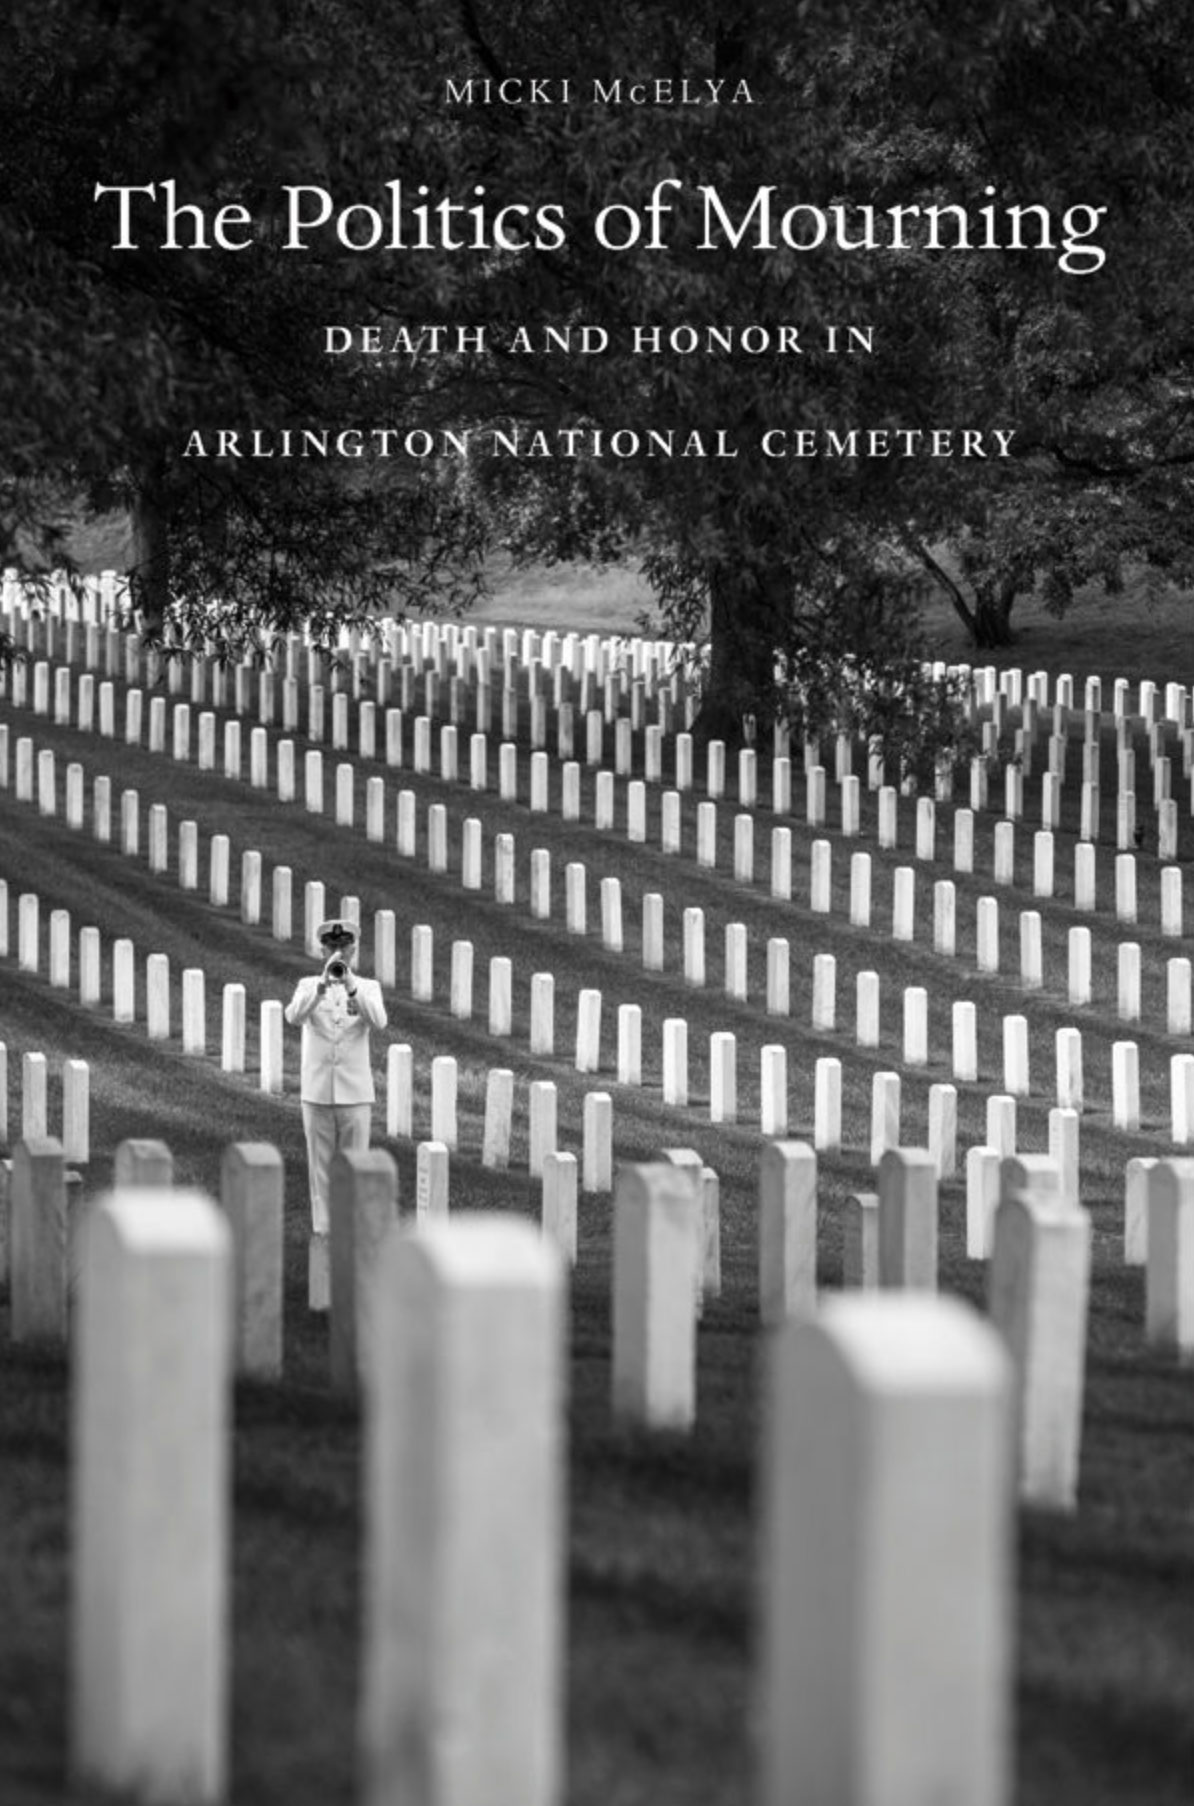 The Politics of Mourning, Death and Honor in Arlington National Cemetery – by Micki McElya